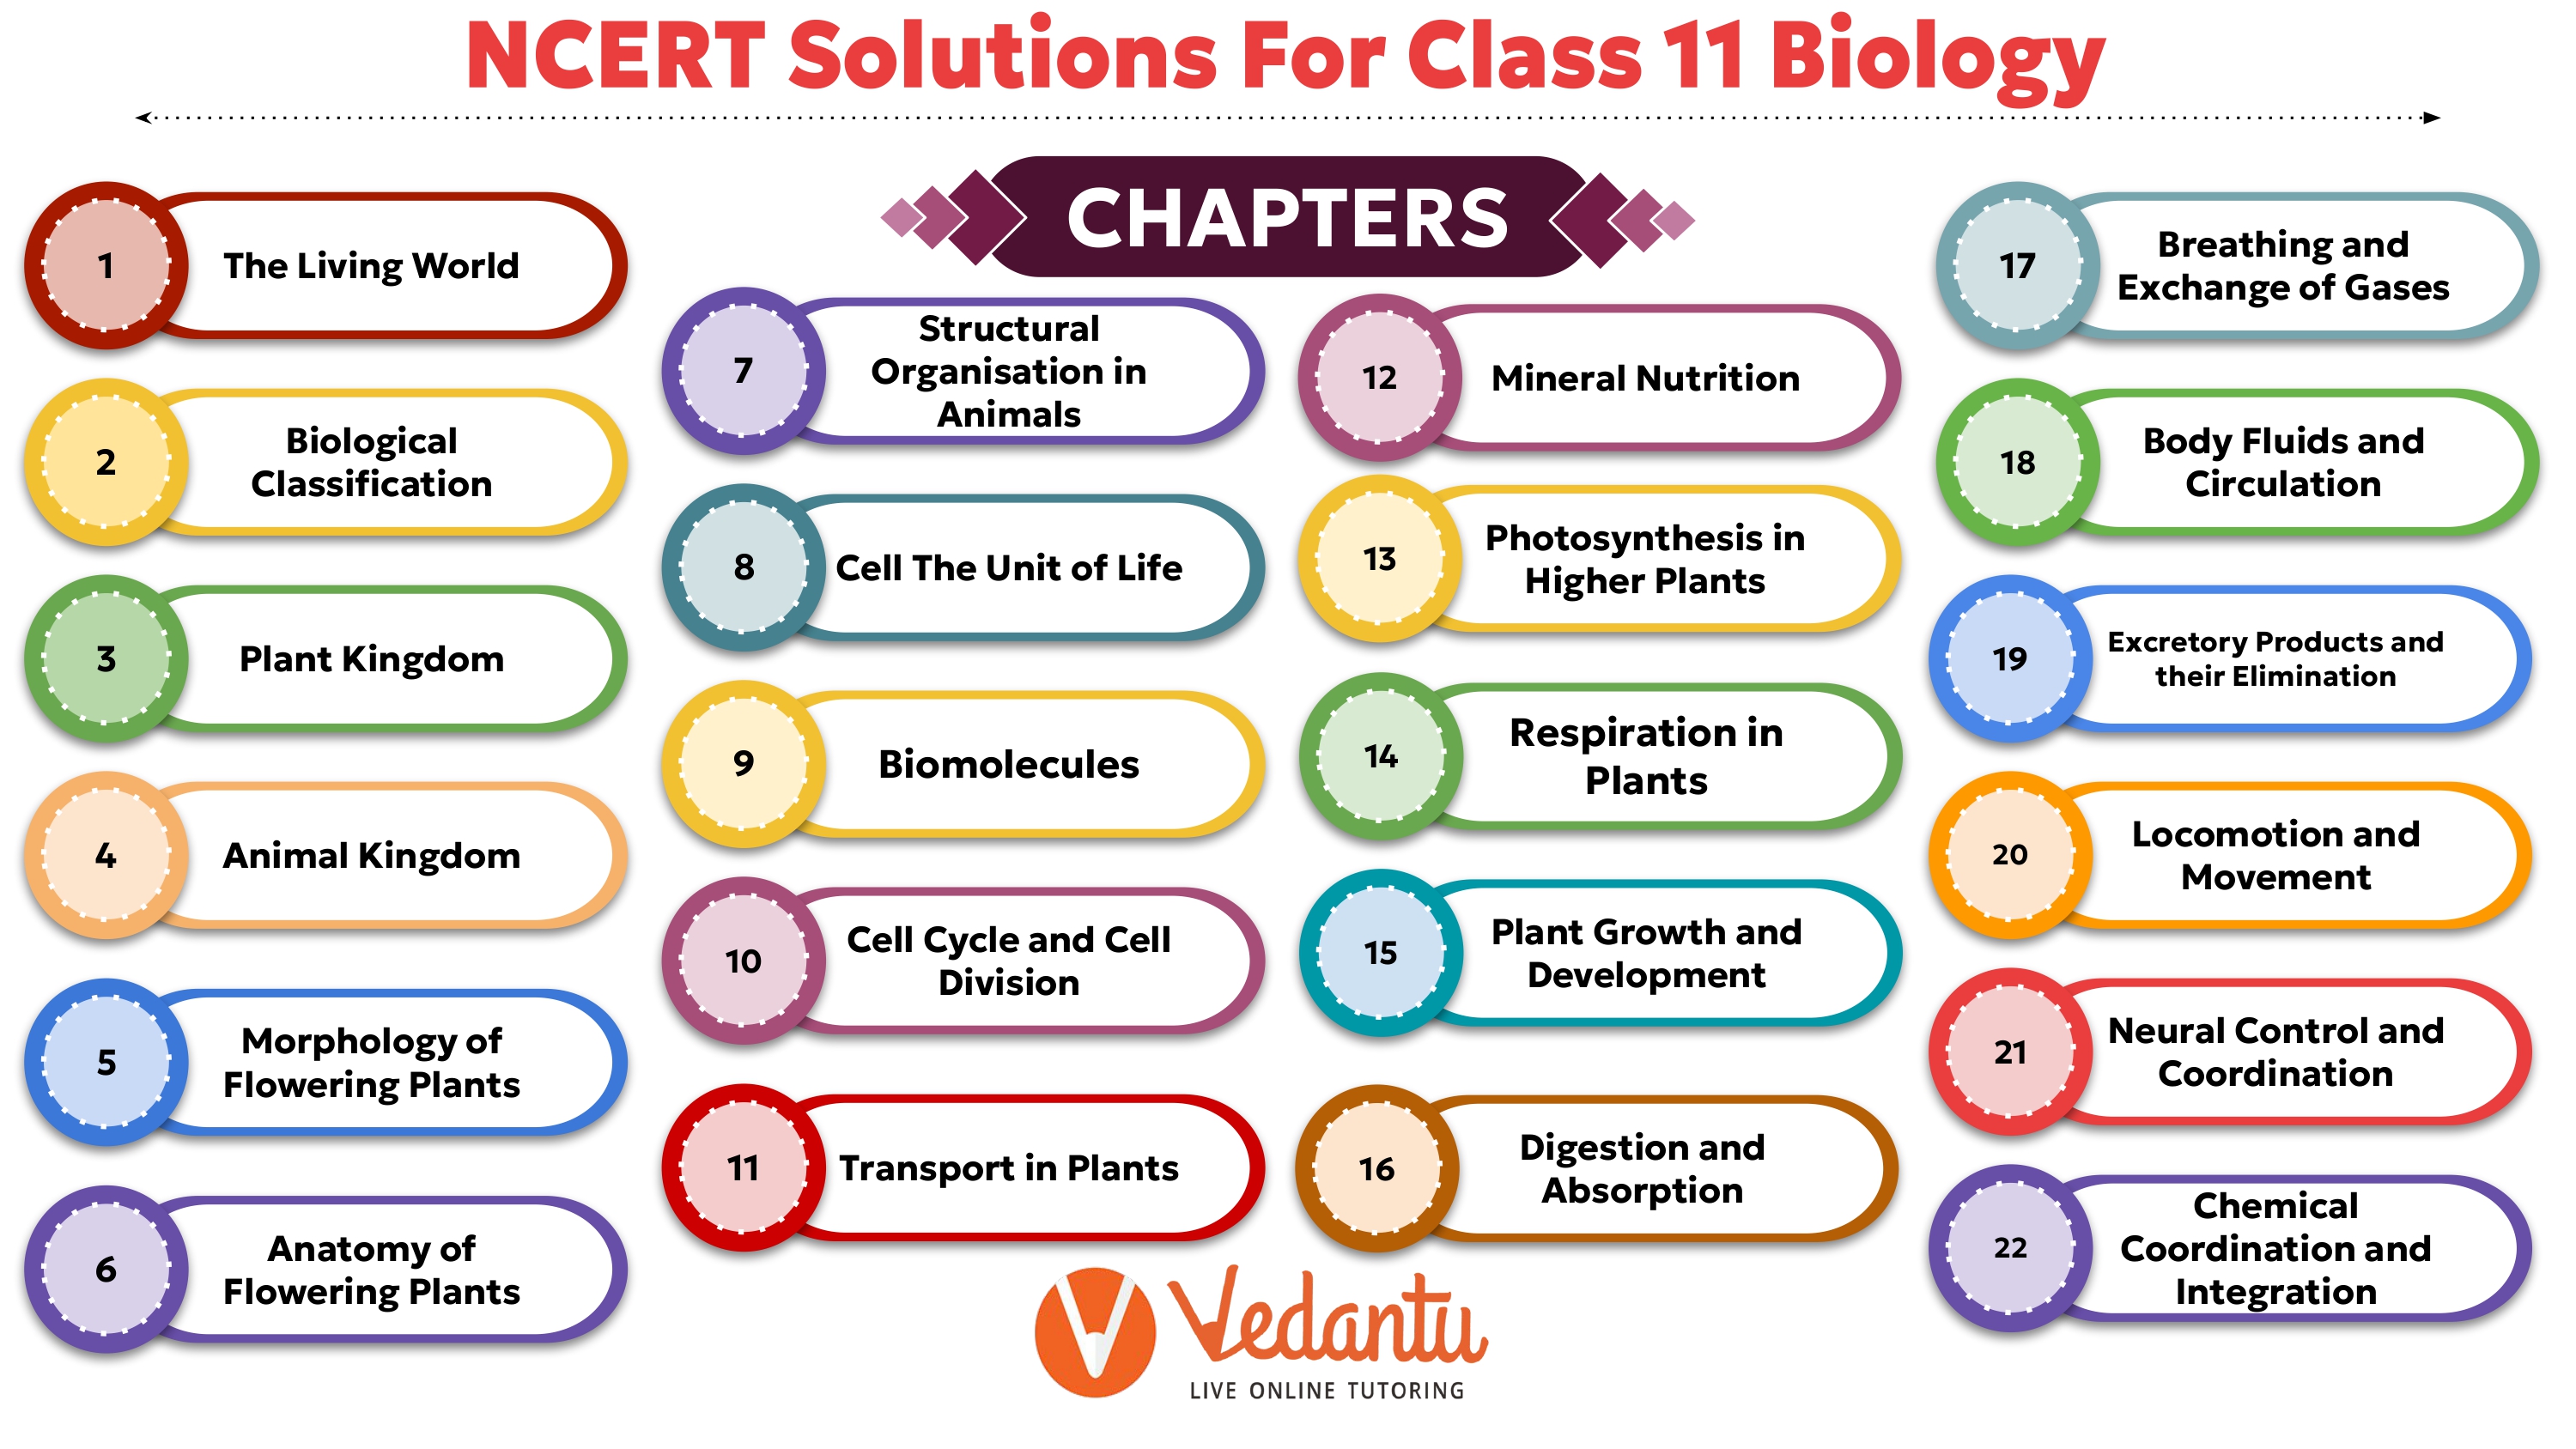 NCERT Solutions For class 11 Biology Chapter wise Overview